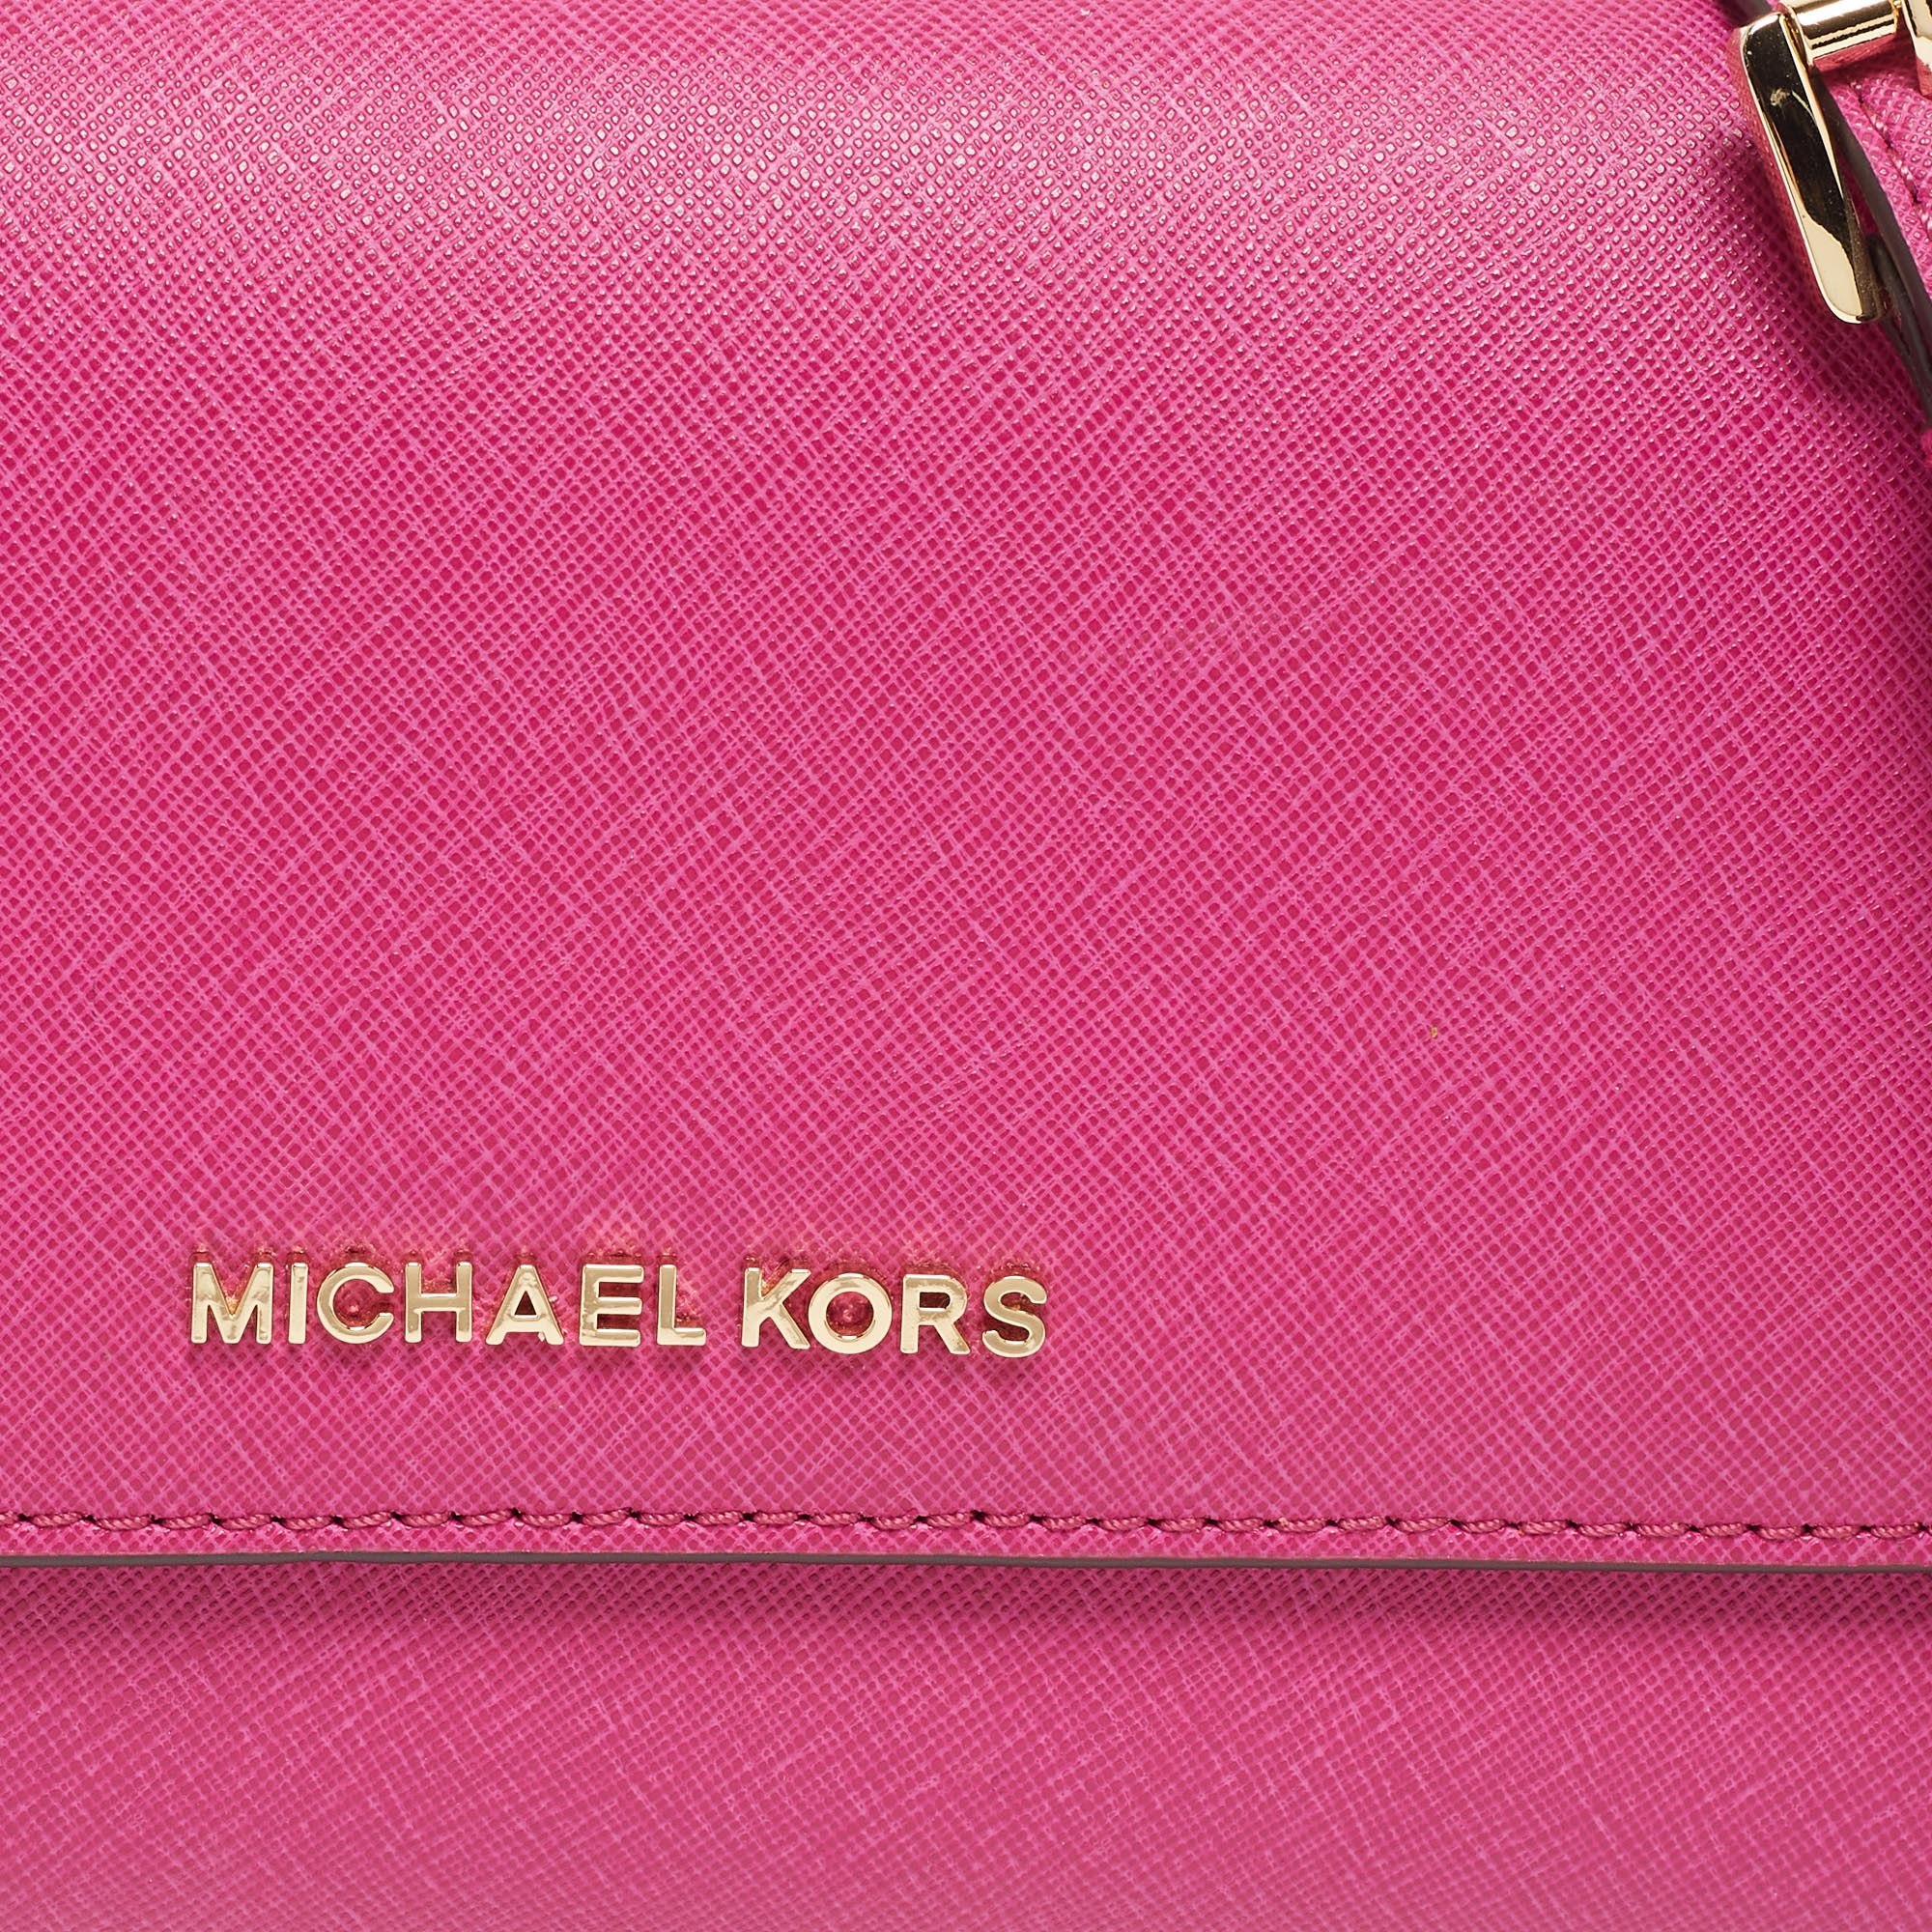 Michael Kors Pink Saffiano Leather Flap 3in1 Crossbody Bag